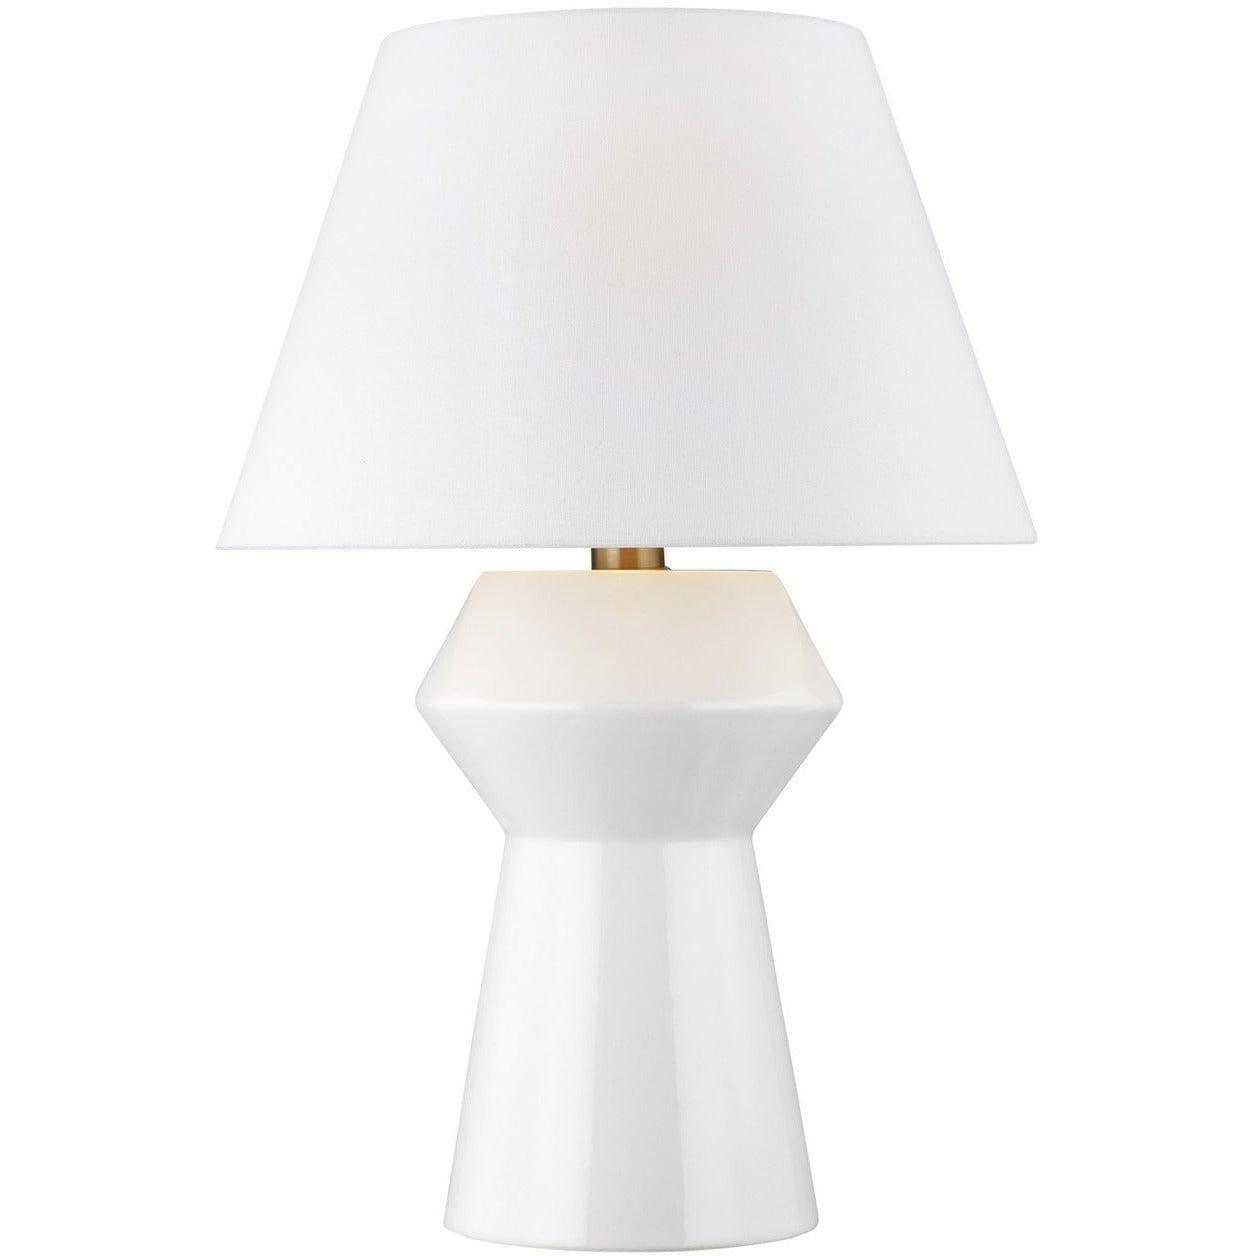 Visual Comfort Studio Collection - Abaco Inverted Table Lamp - CT1061ARCBBS1 | Montreal Lighting & Hardware